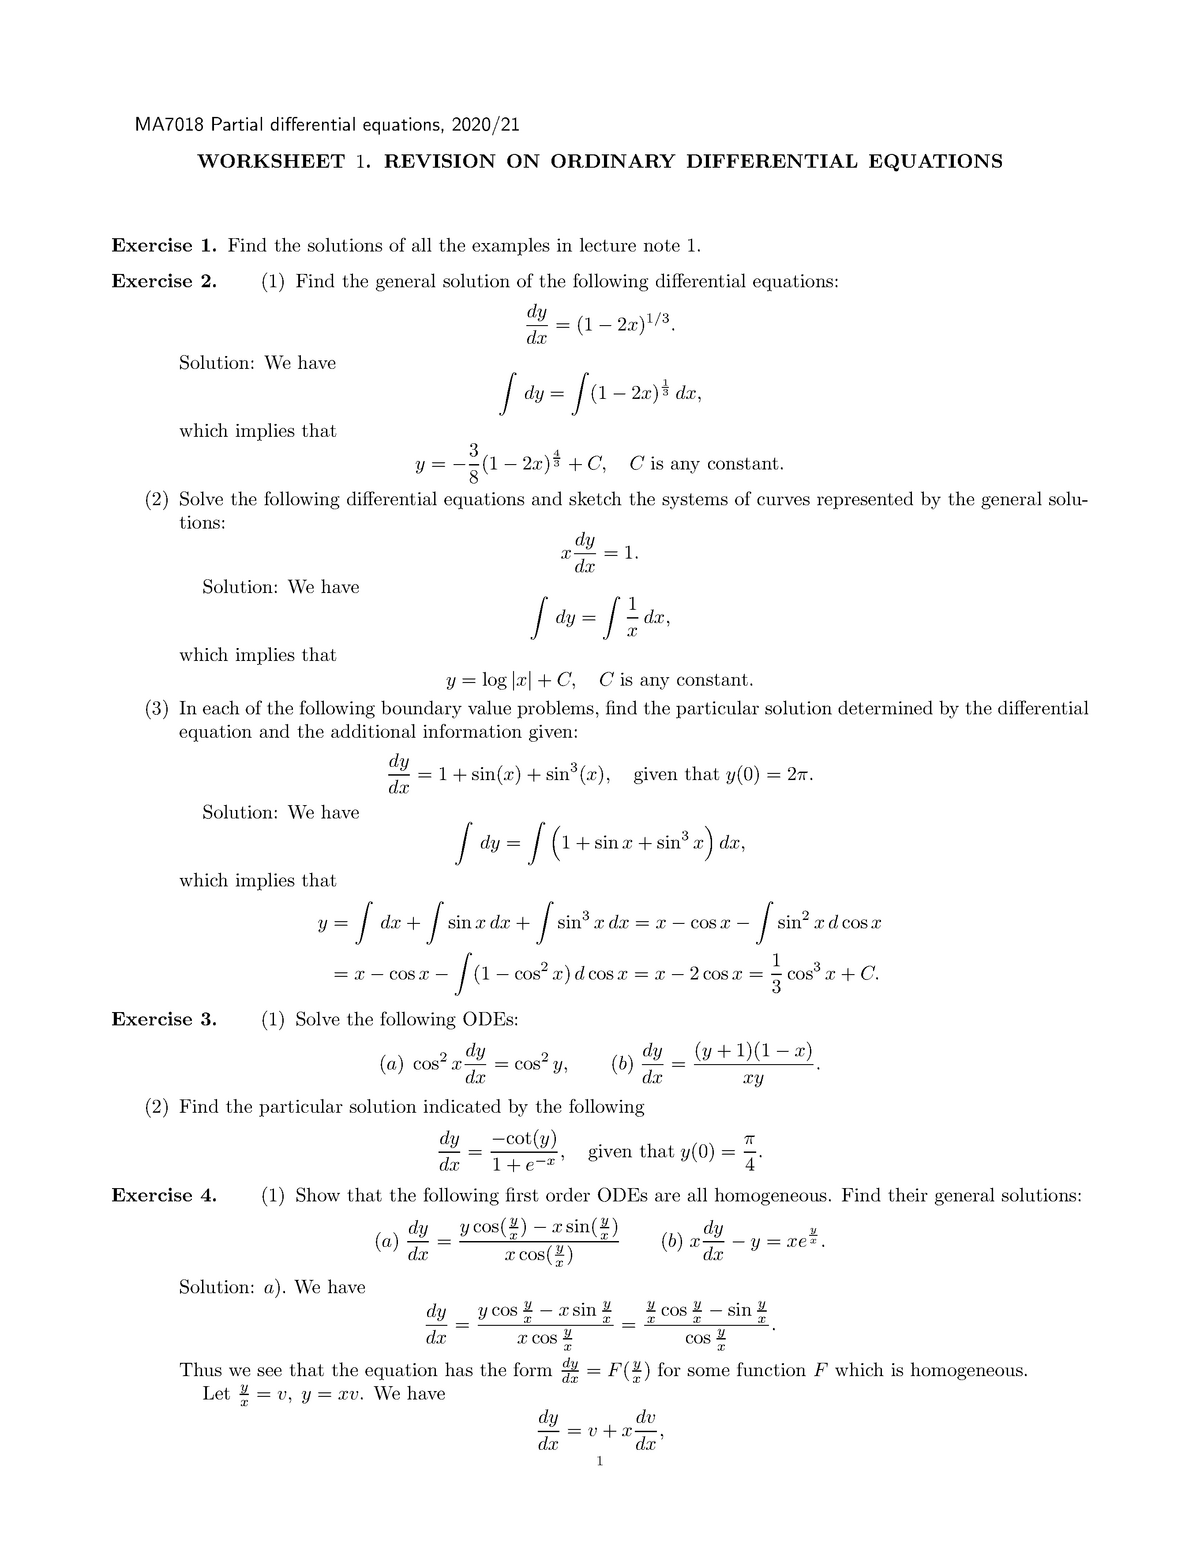 worksheet-1-odd-pde-s-ma7018-partial-differential-equations-2020-worksheet-1-revision-on